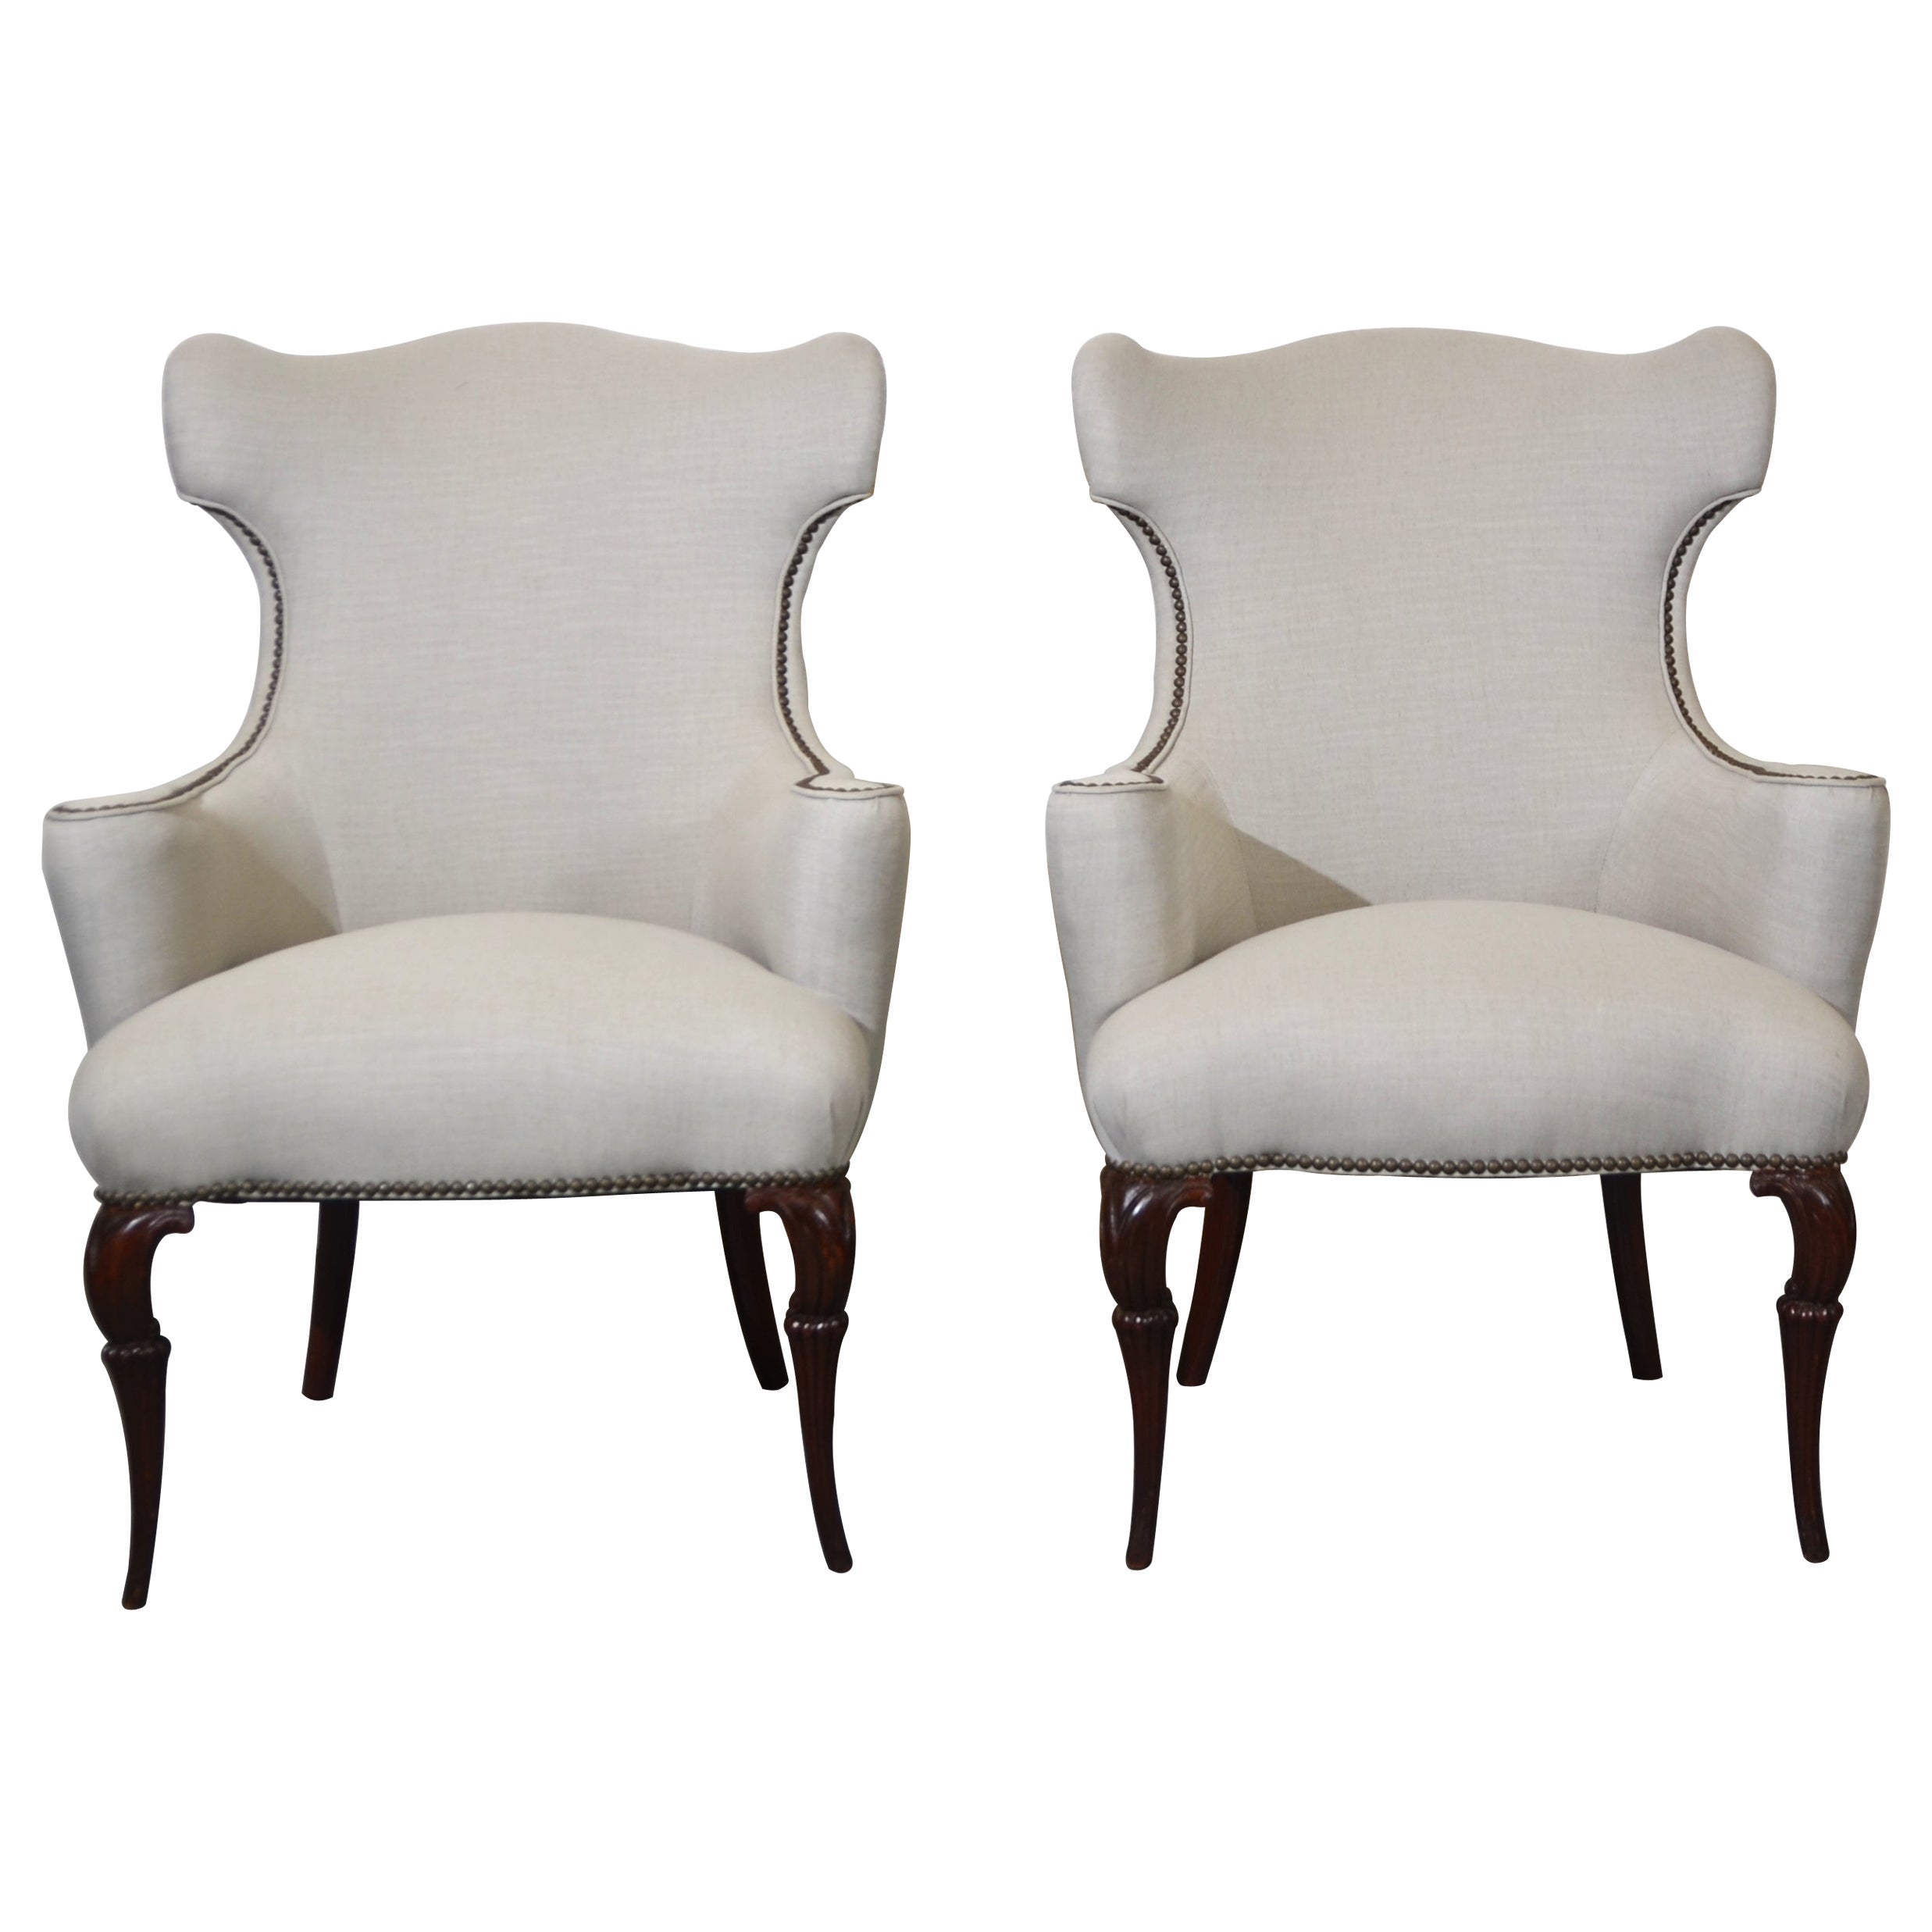 1940's American Butterfly Wingback Chairs Set of 2